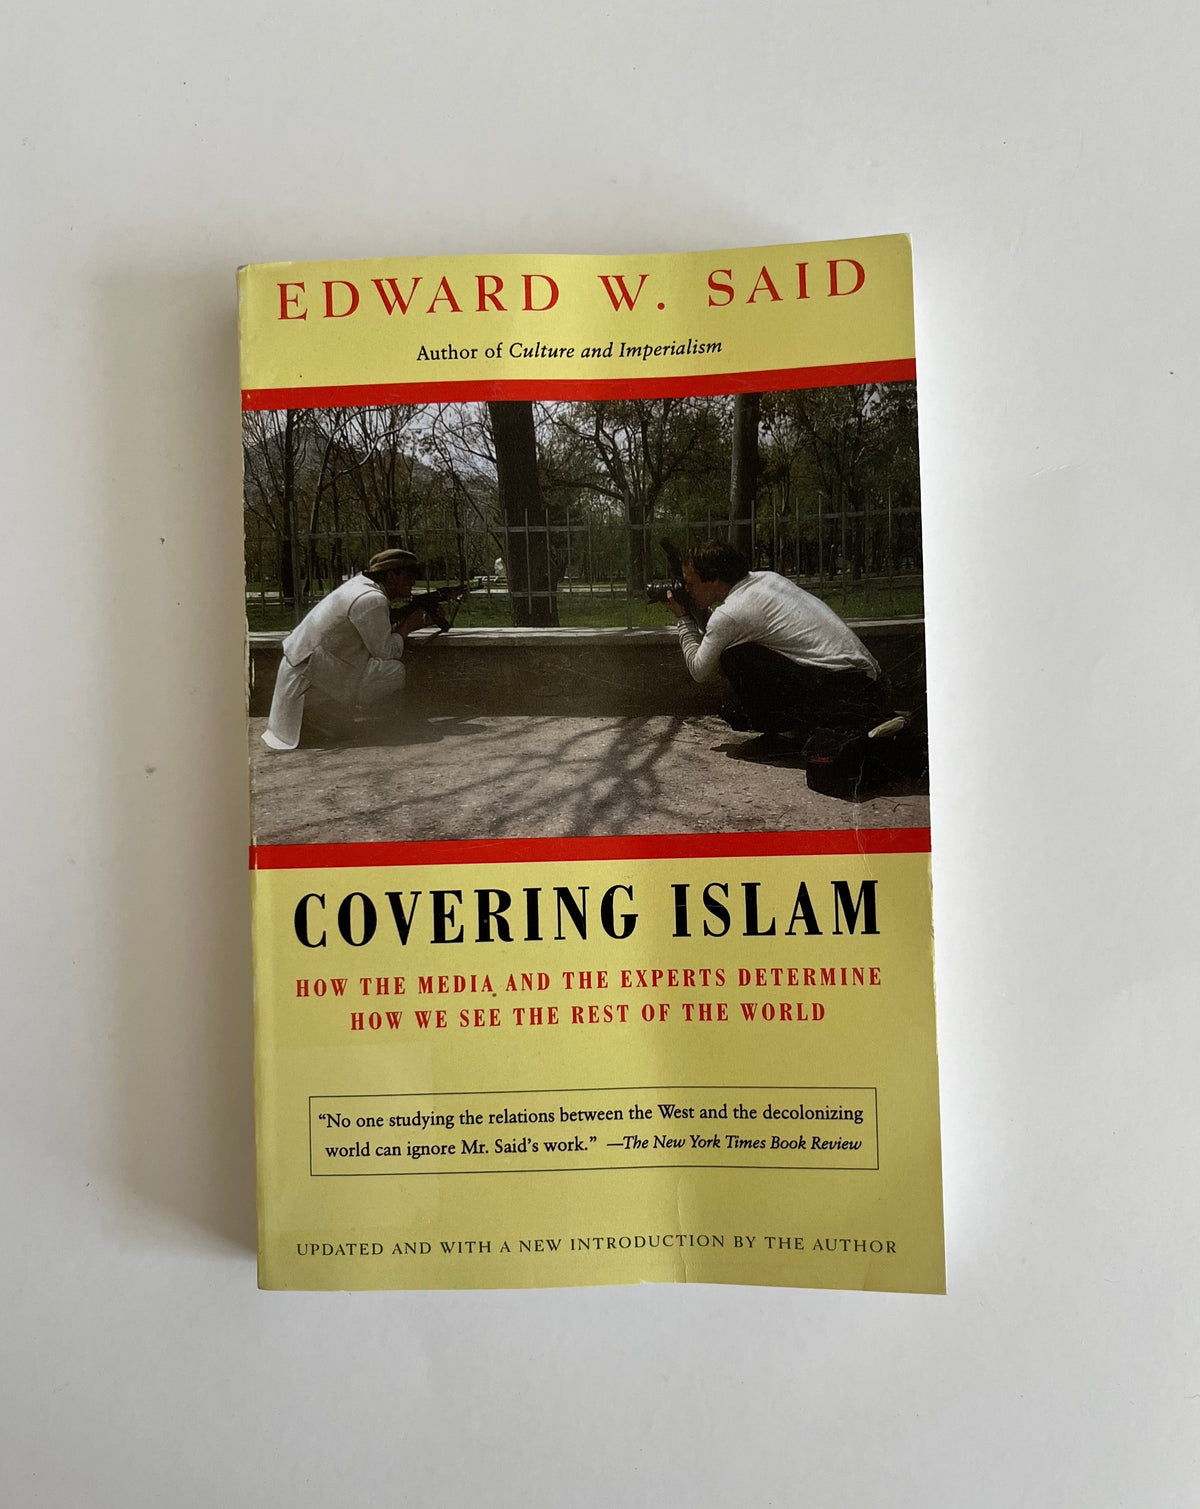 Covering Islam: How the Media and the Experts Determine How We See the Rest of the World by Edward Said